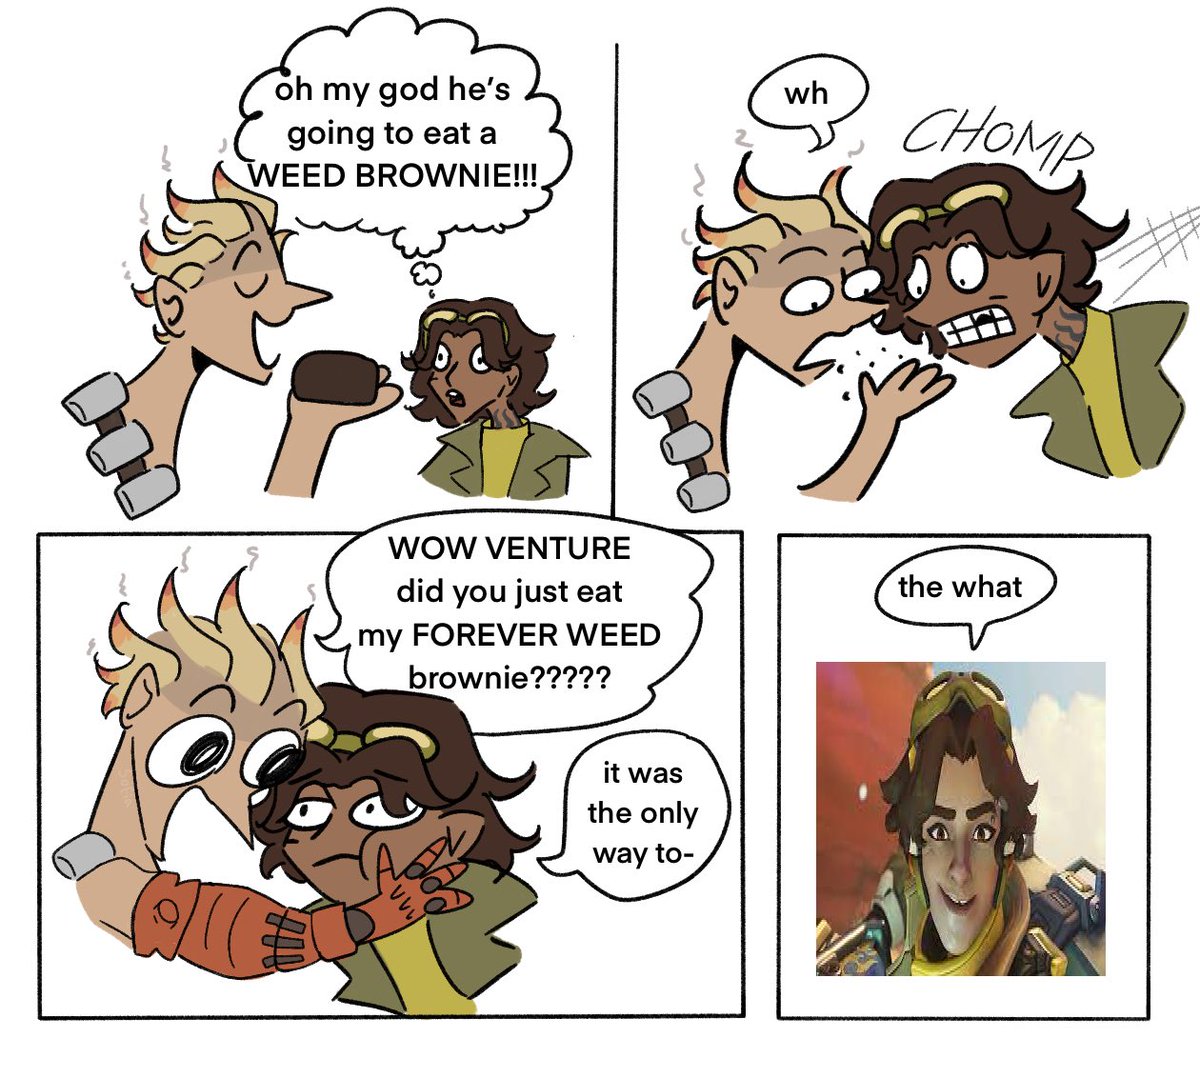 the weed brownie incident
#junkrat #venture
#overwatchfanart 
(guys i cant wait for april 16th im so excited)